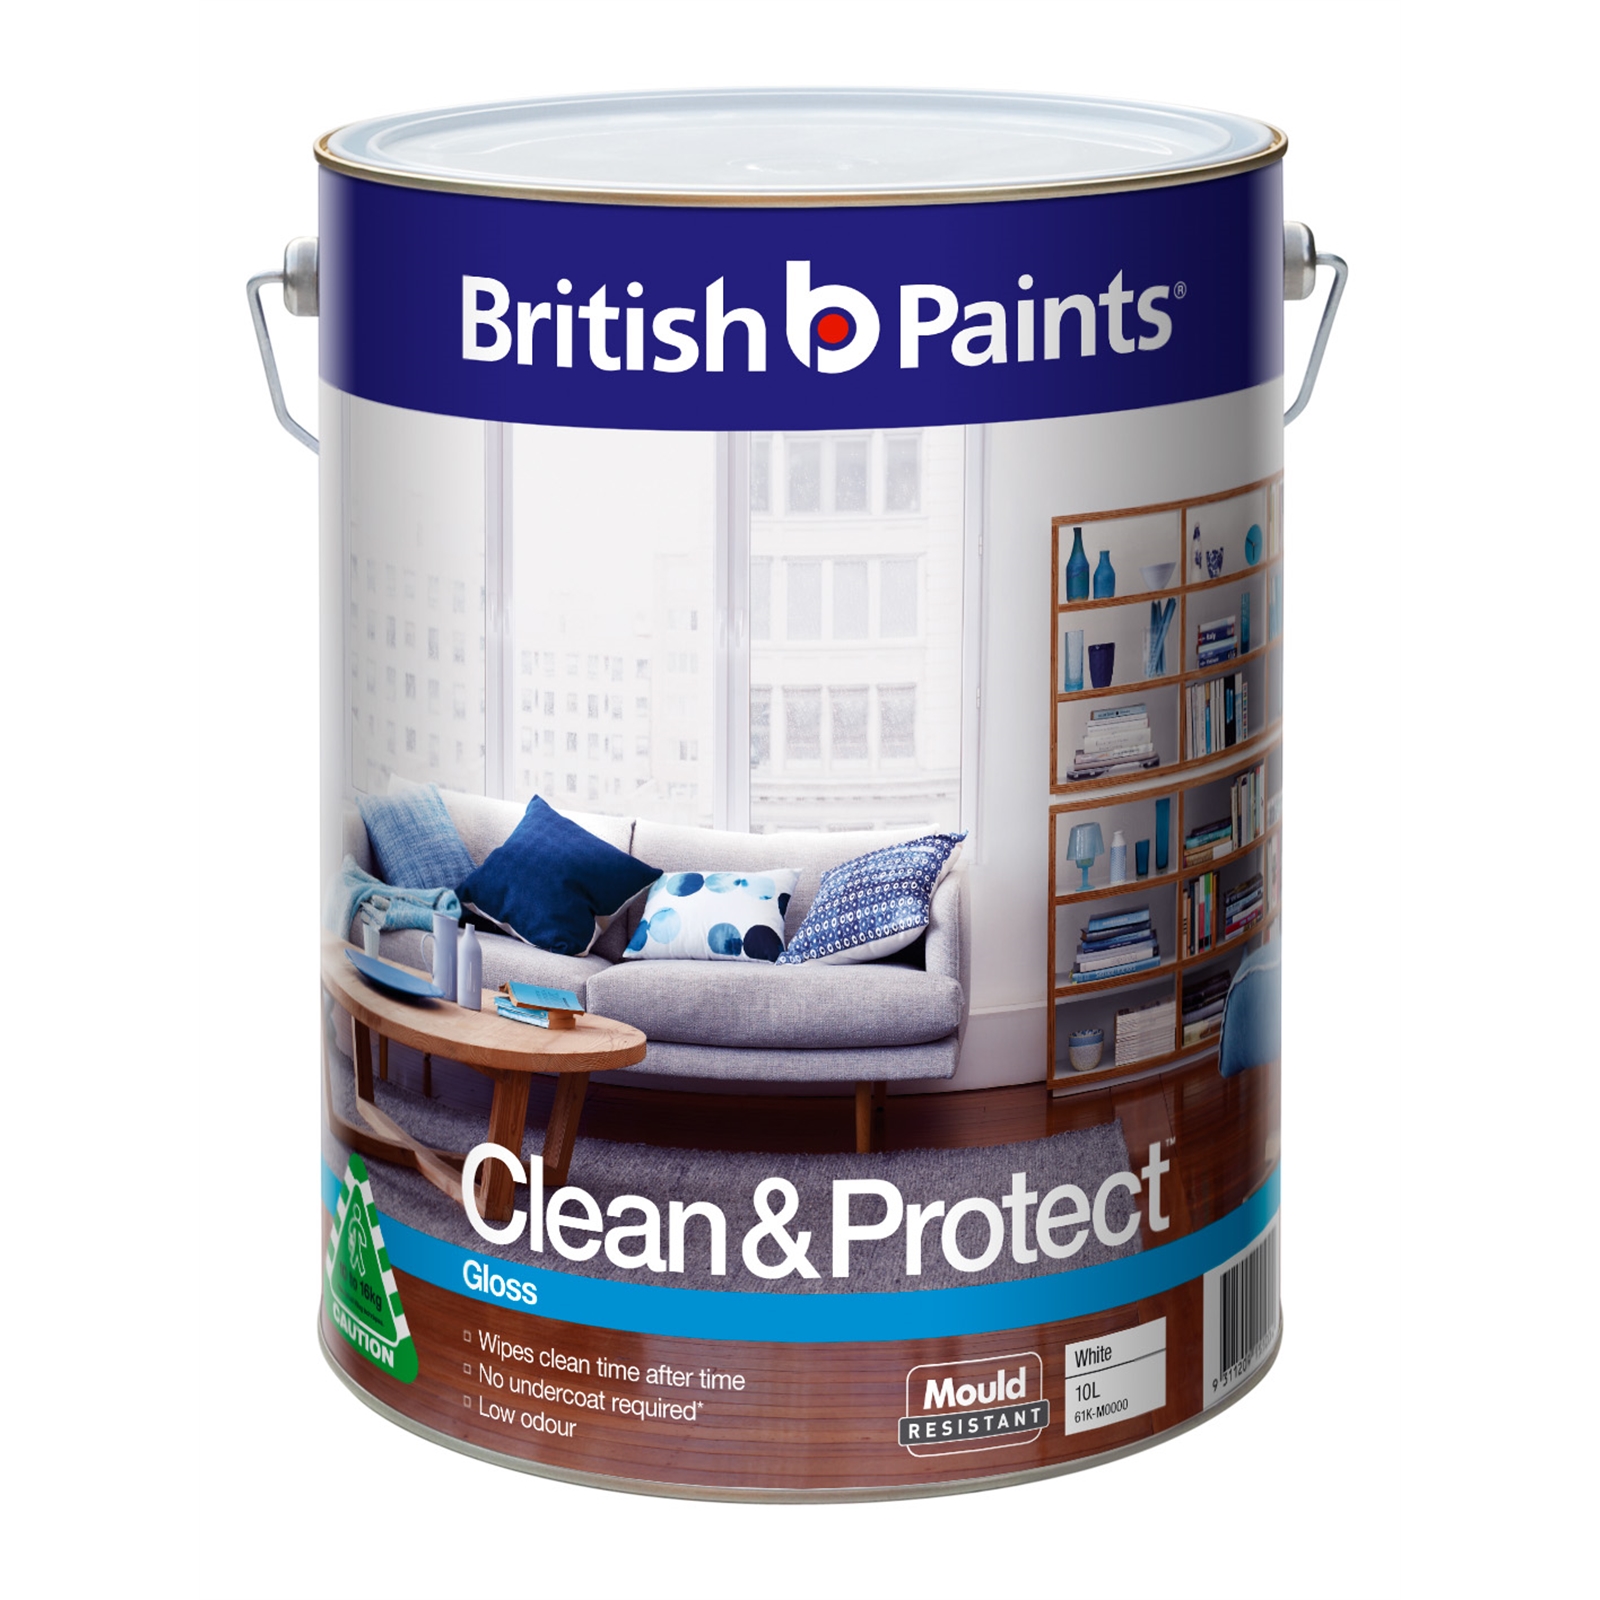 British Paints Clean & Protect 10L Gloss White Interior Paint